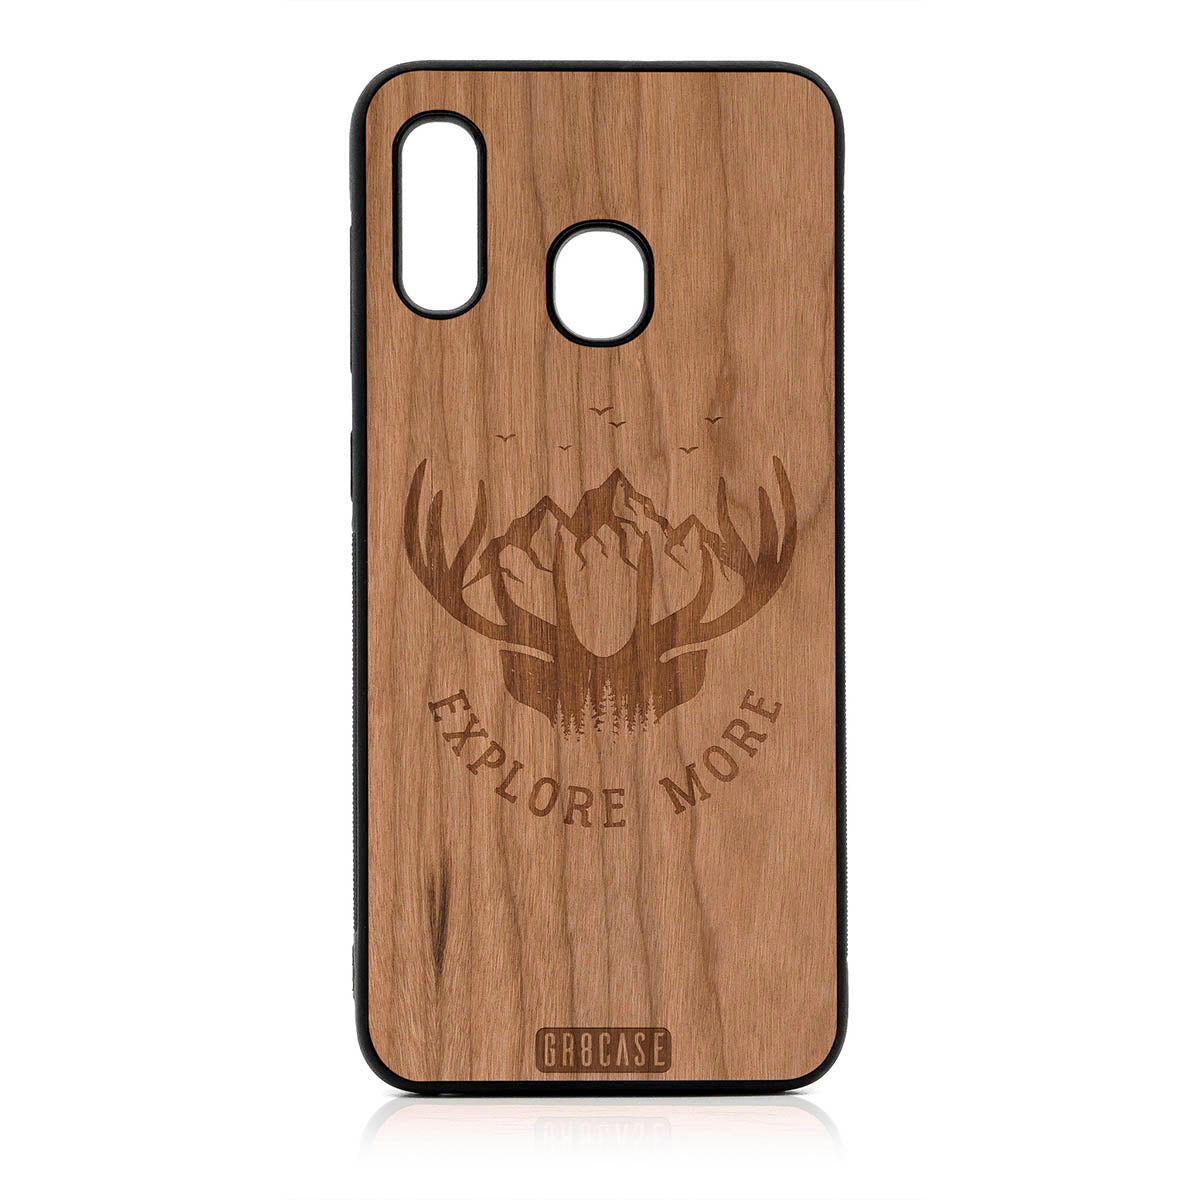 Explore More (Forest, Mountains & Antlers) Design Wood Case For Samsung Galaxy A20 by GR8CASE